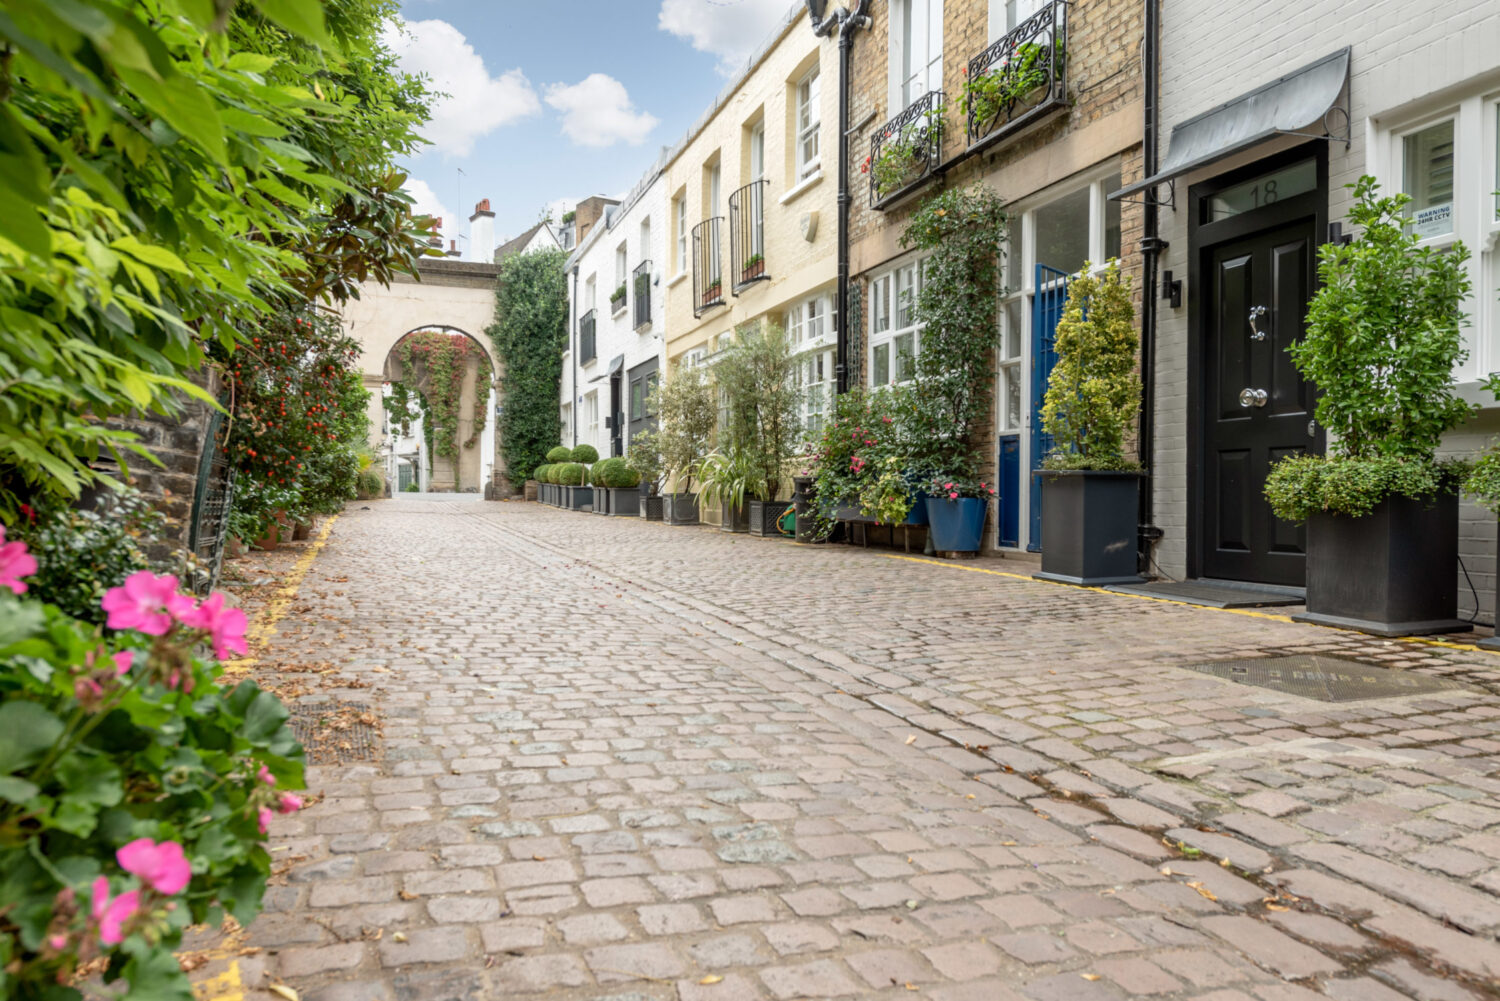 View of the cobbles and arch in Kynance Mews